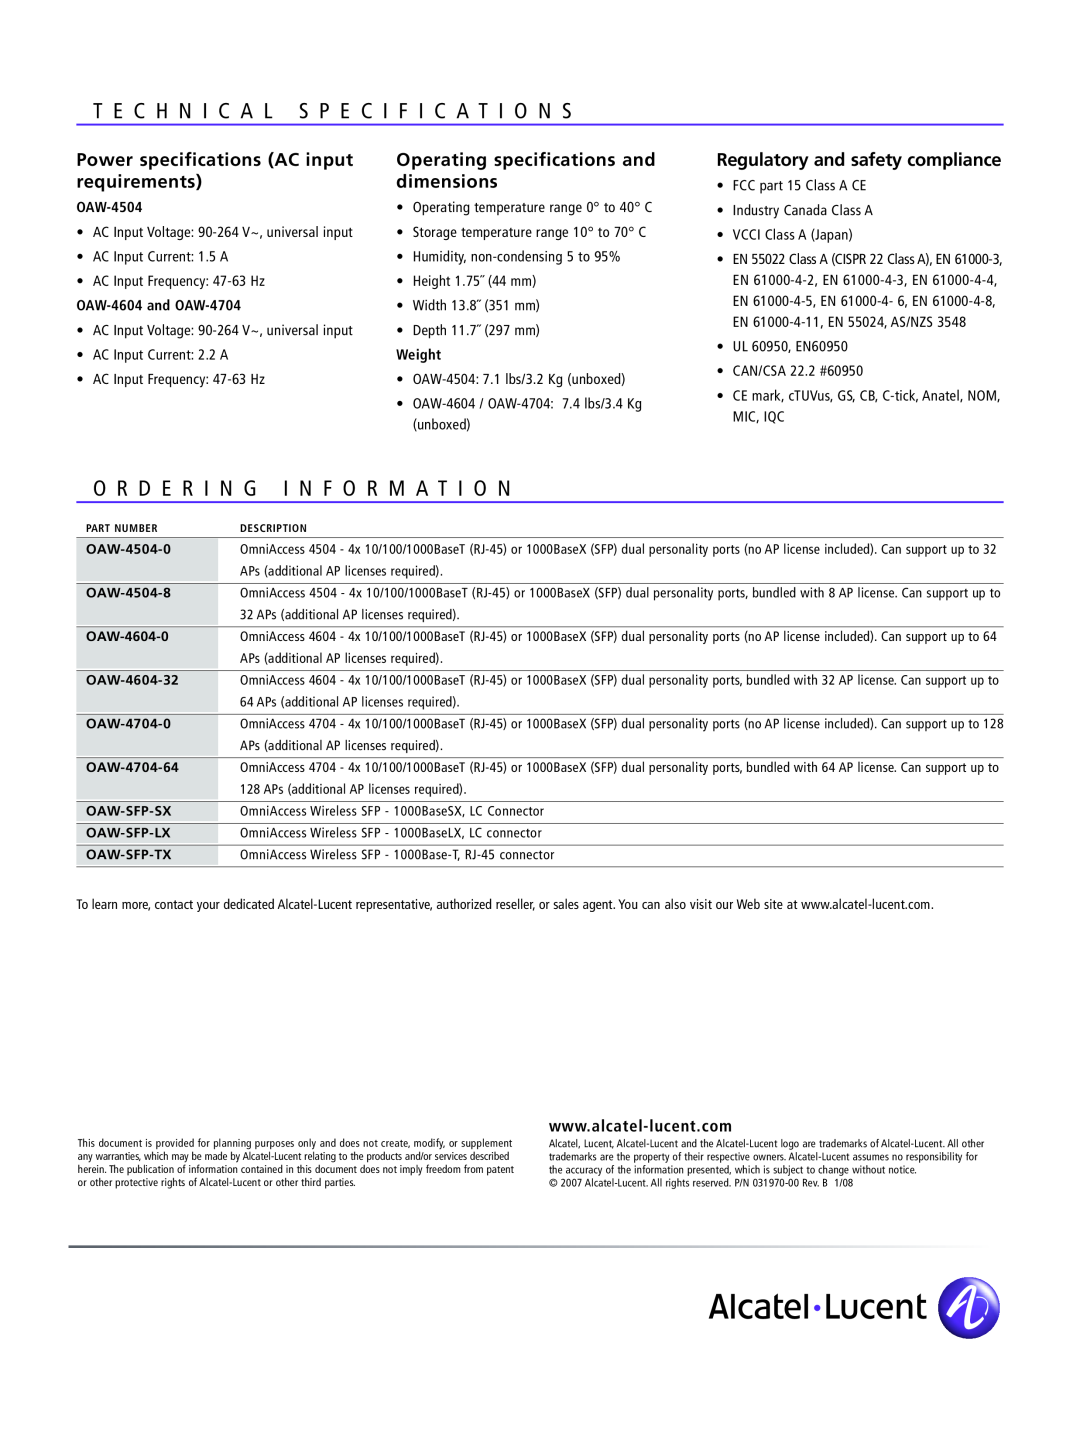 Alcatel-Lucent 4704 I Ng, Informa, Tion, Power specifications AC input, Operating specifications and, requireme nts, Ions 